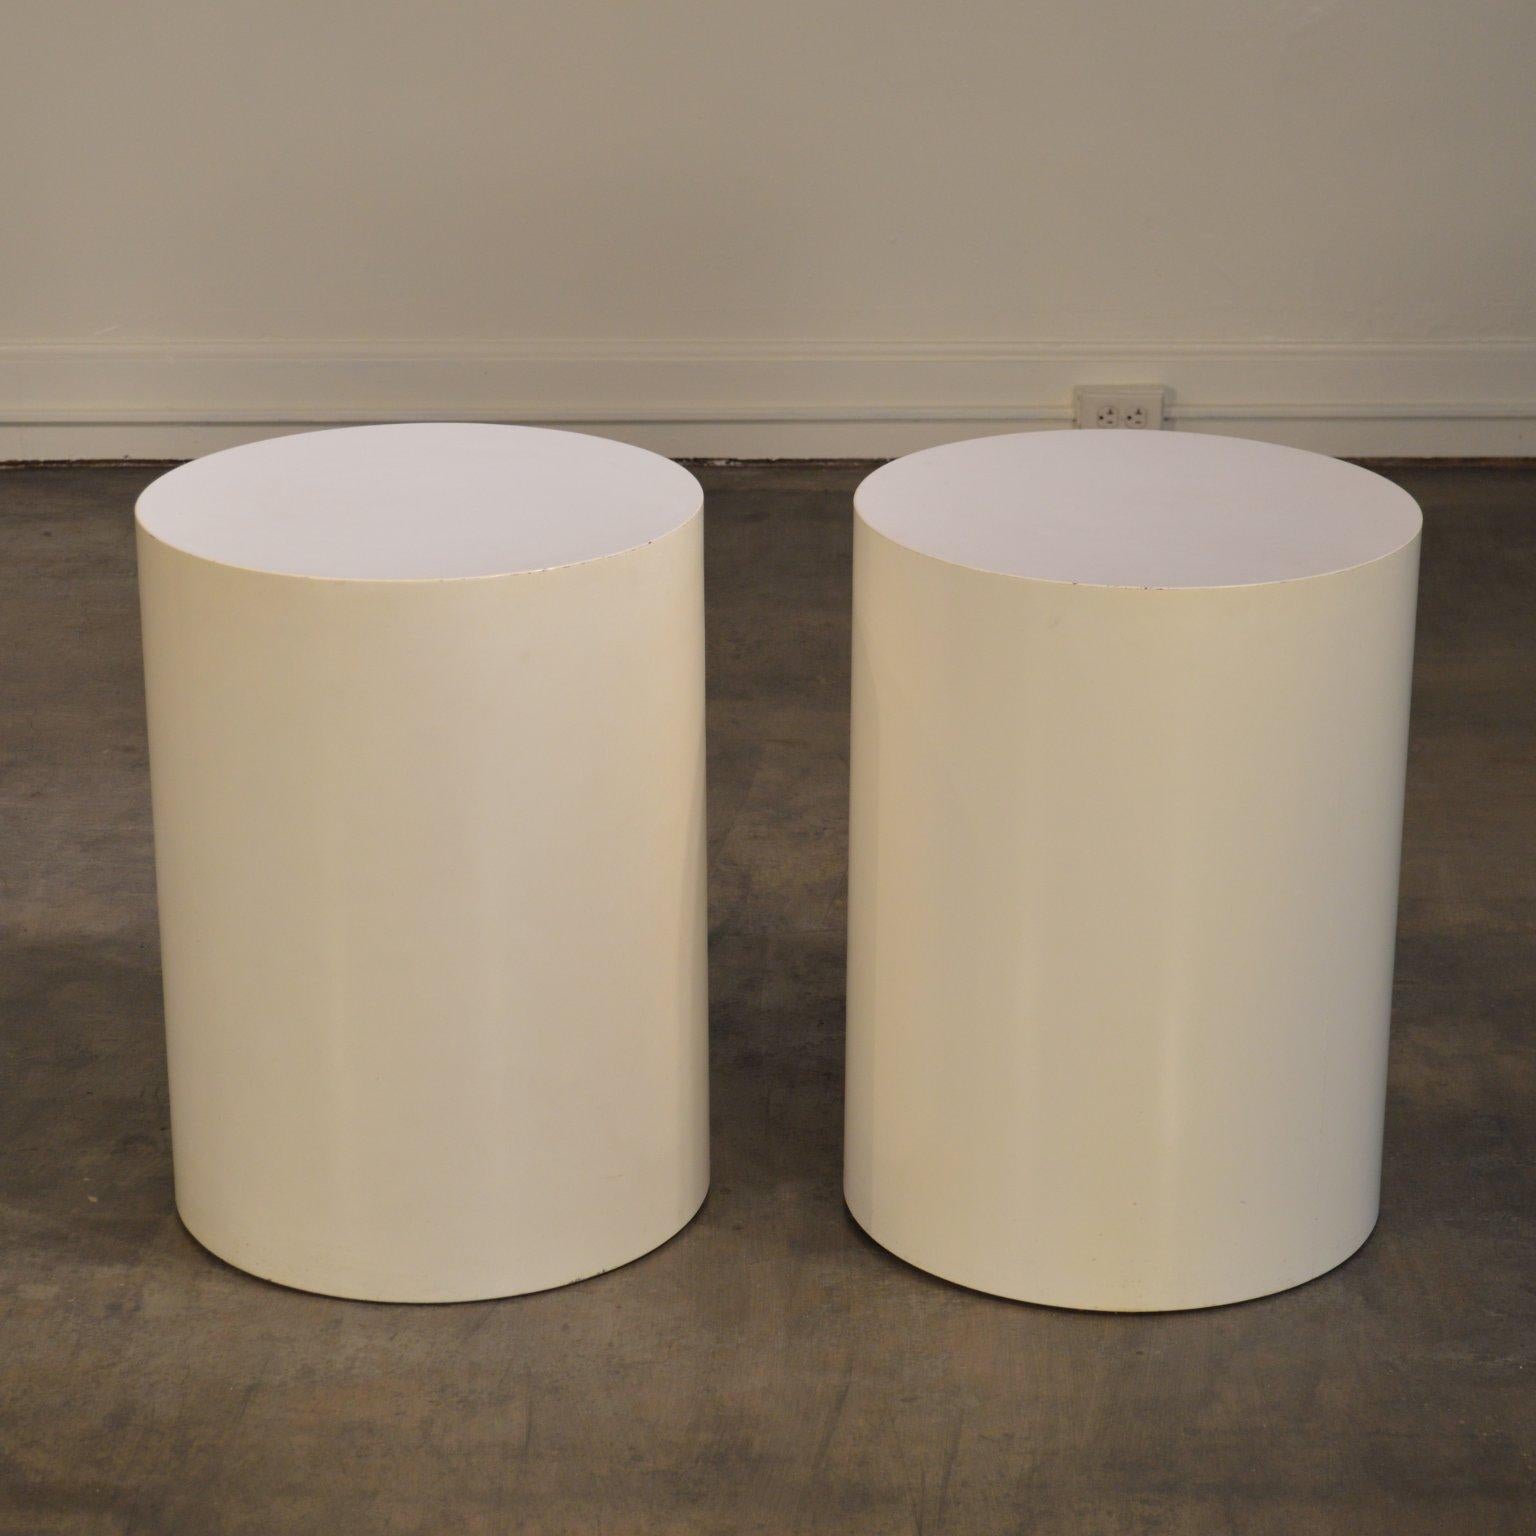 A pair of tall white lacquered drum tables by Paul Mayen for Habitat. A signature design made recognizable by Terrance Conran's 'House' Books of the 1970's and 80's. This simple and substantial design lends itself to a number of settings from